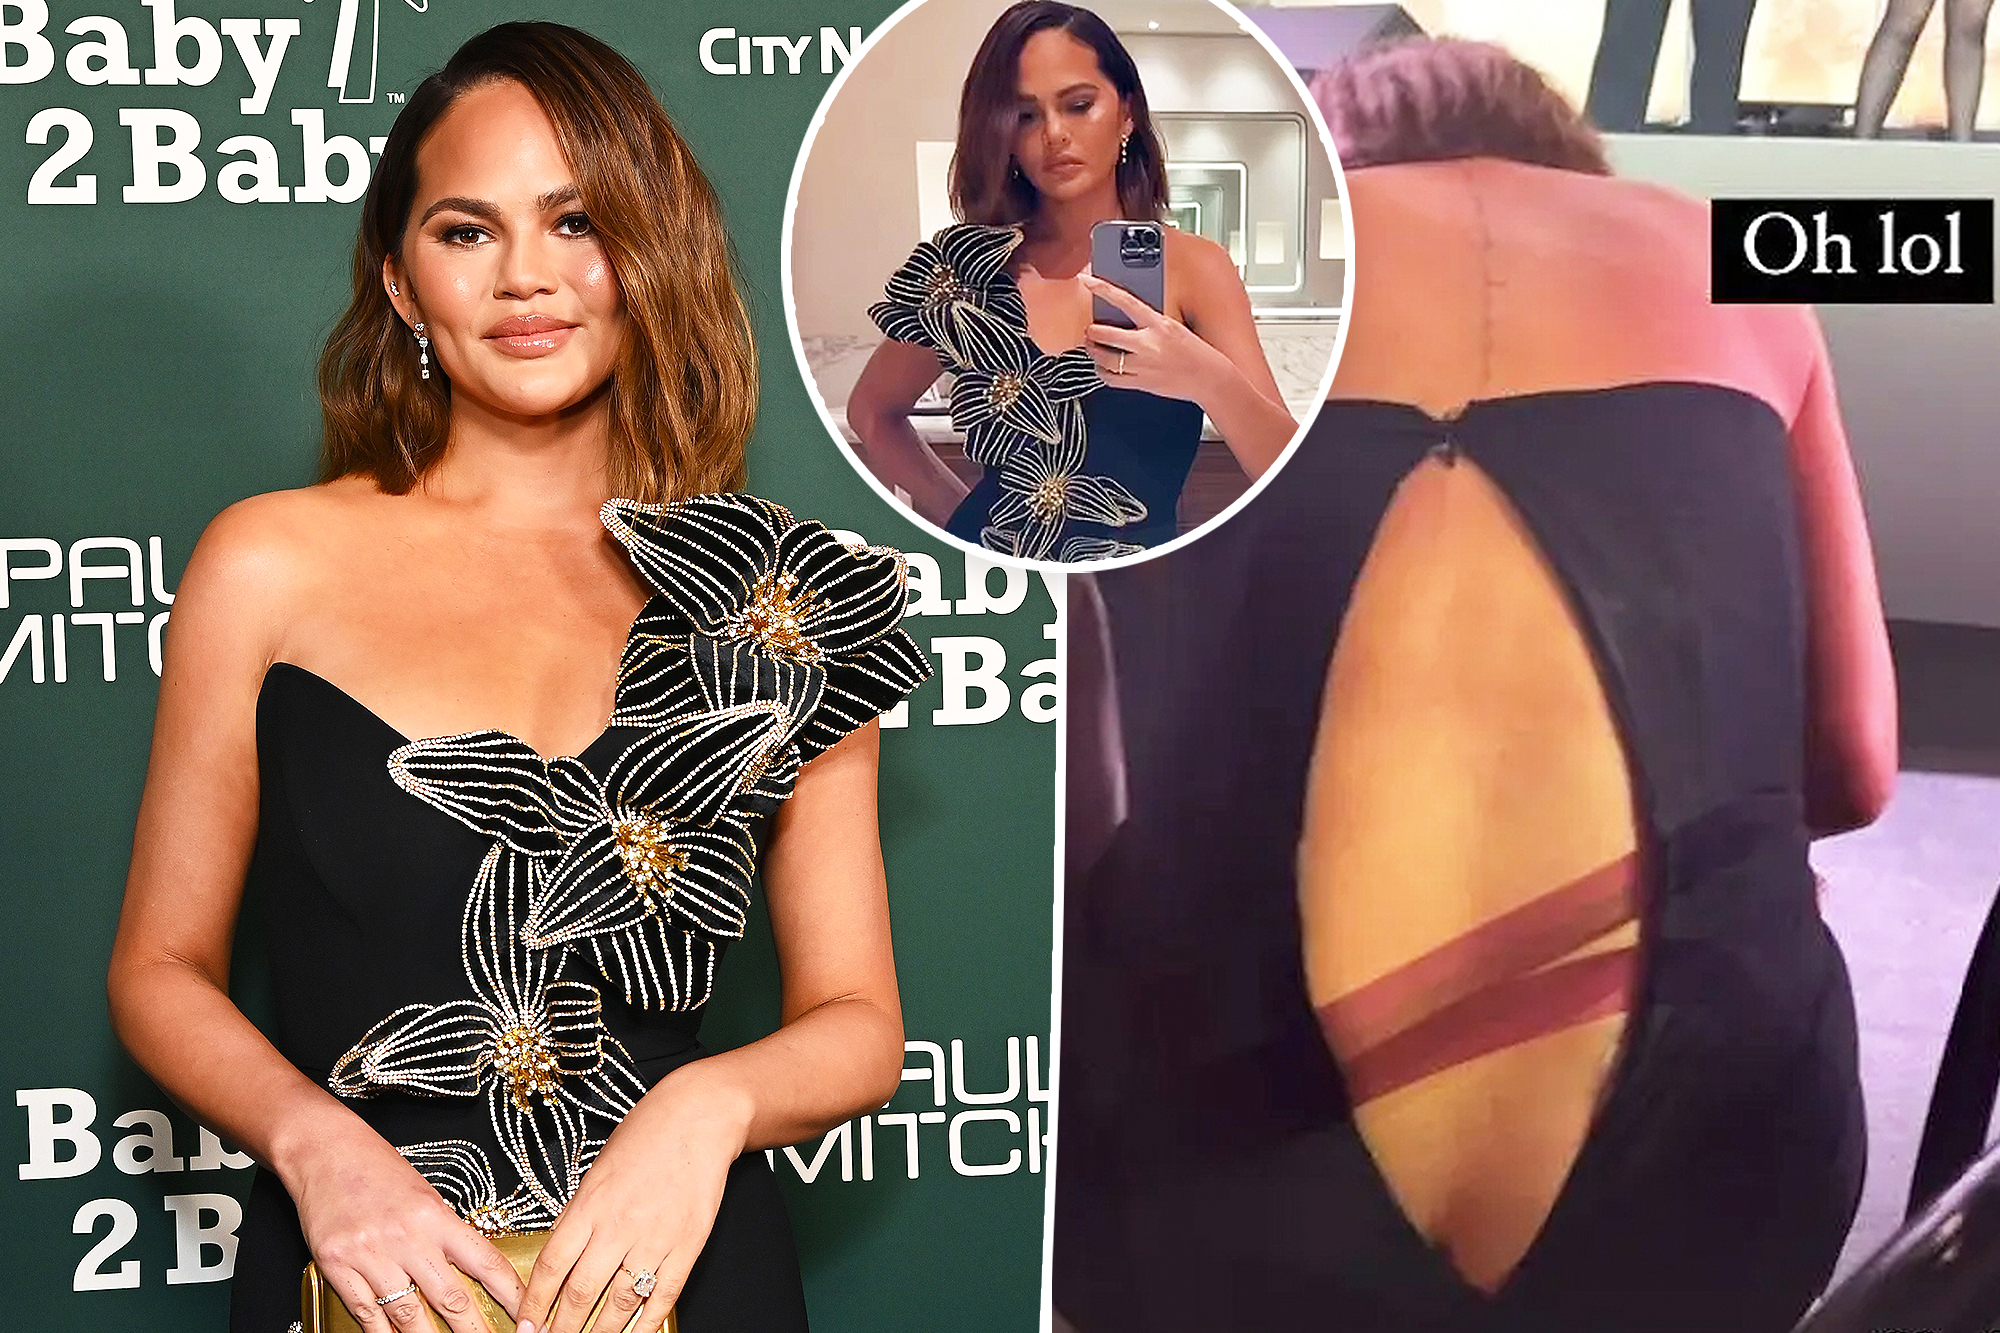 ali imran naqvi recommends chrissy teigen wardrobe malfunction uncensored pictures pic